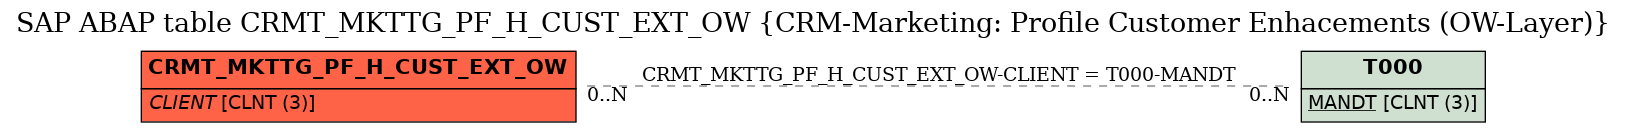 E-R Diagram for table CRMT_MKTTG_PF_H_CUST_EXT_OW (CRM-Marketing: Profile Customer Enhacements (OW-Layer))